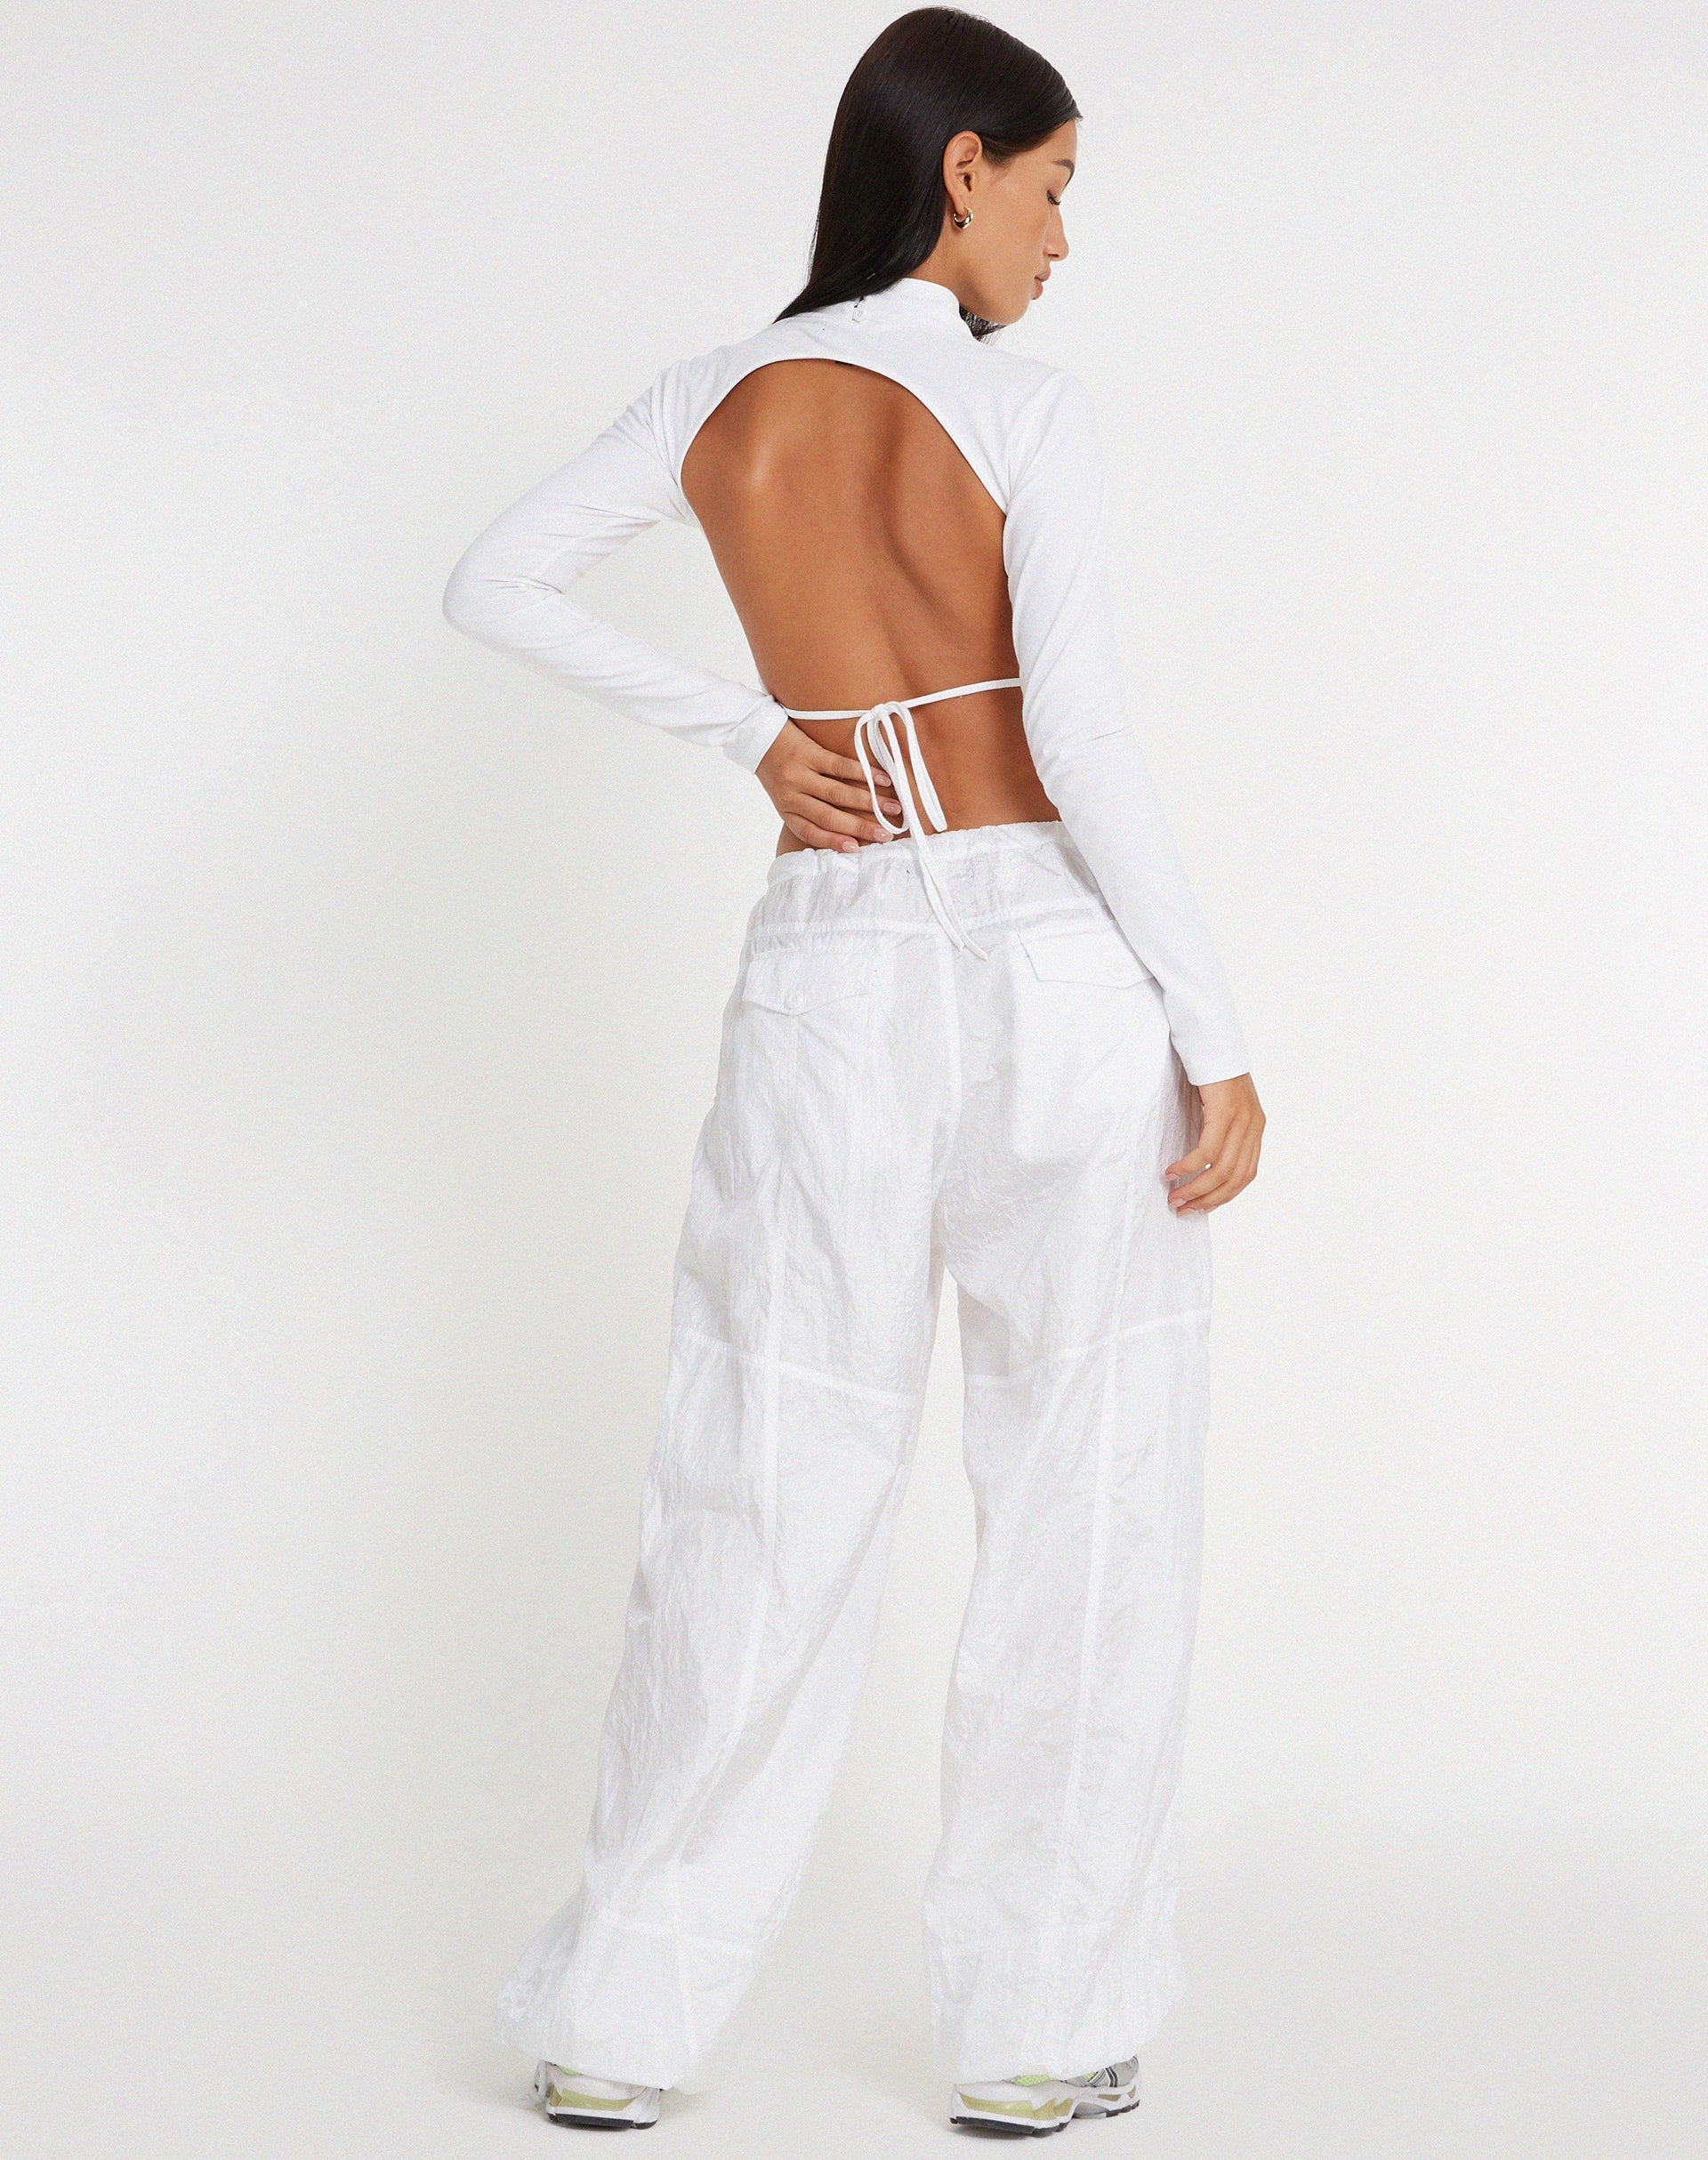 image of Quelia Crop Top in White